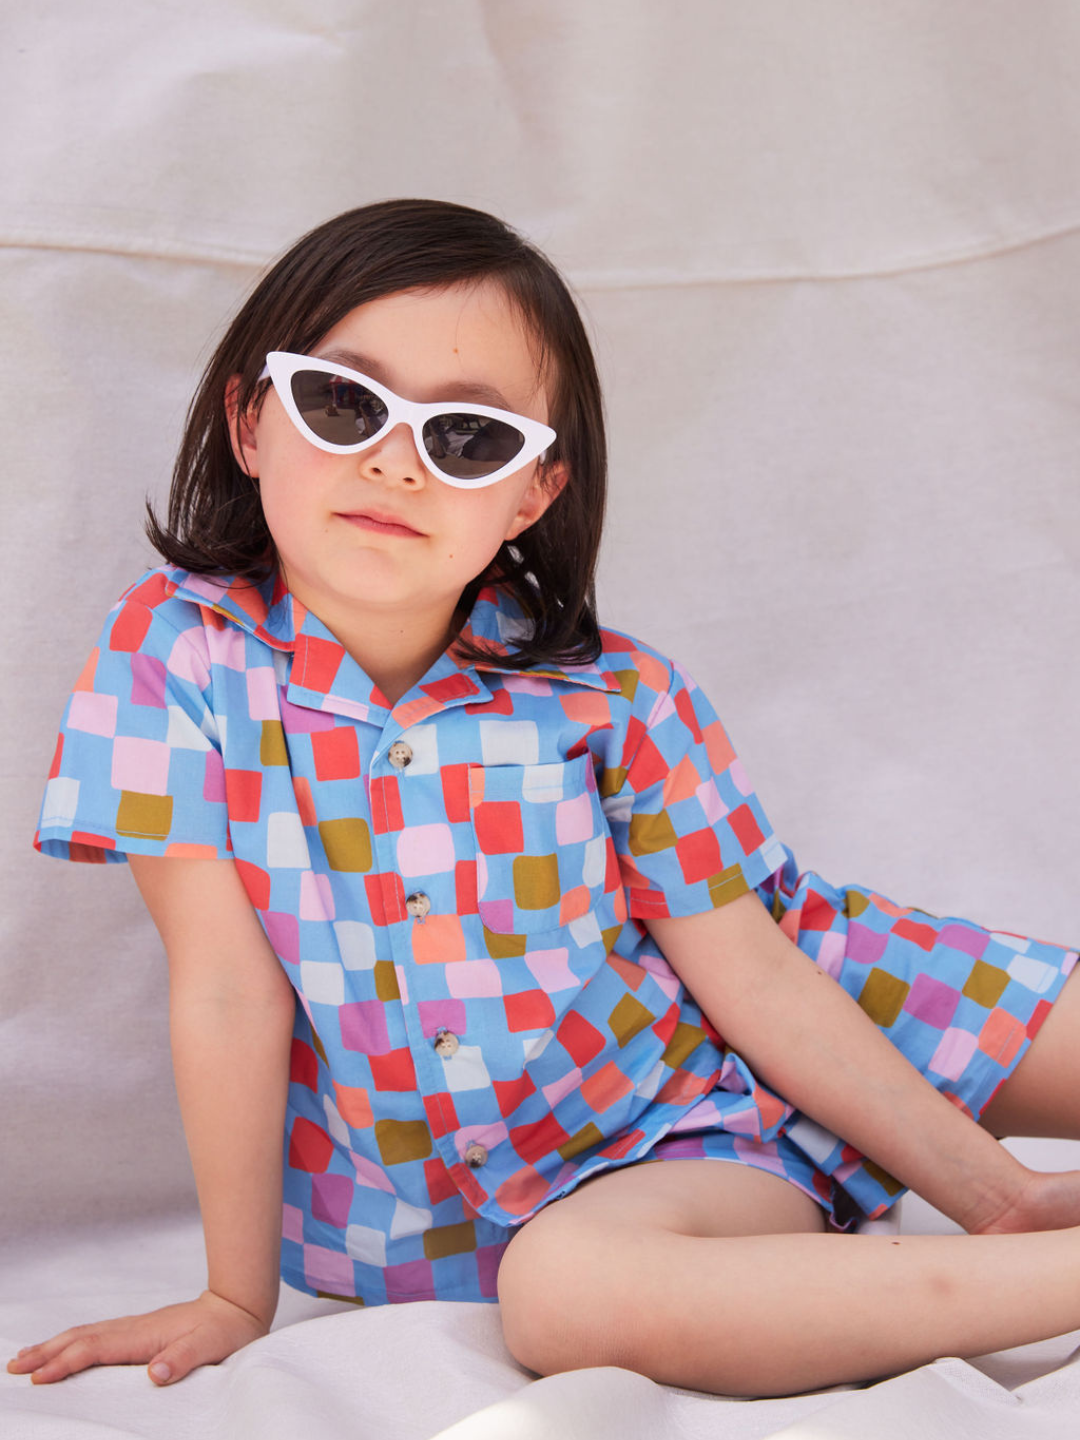 A child wearing the white Stingray kids Sunglasses. She is seated on a beige cloth backdrop and wears a blue shorts set patterned with multicolored squares.